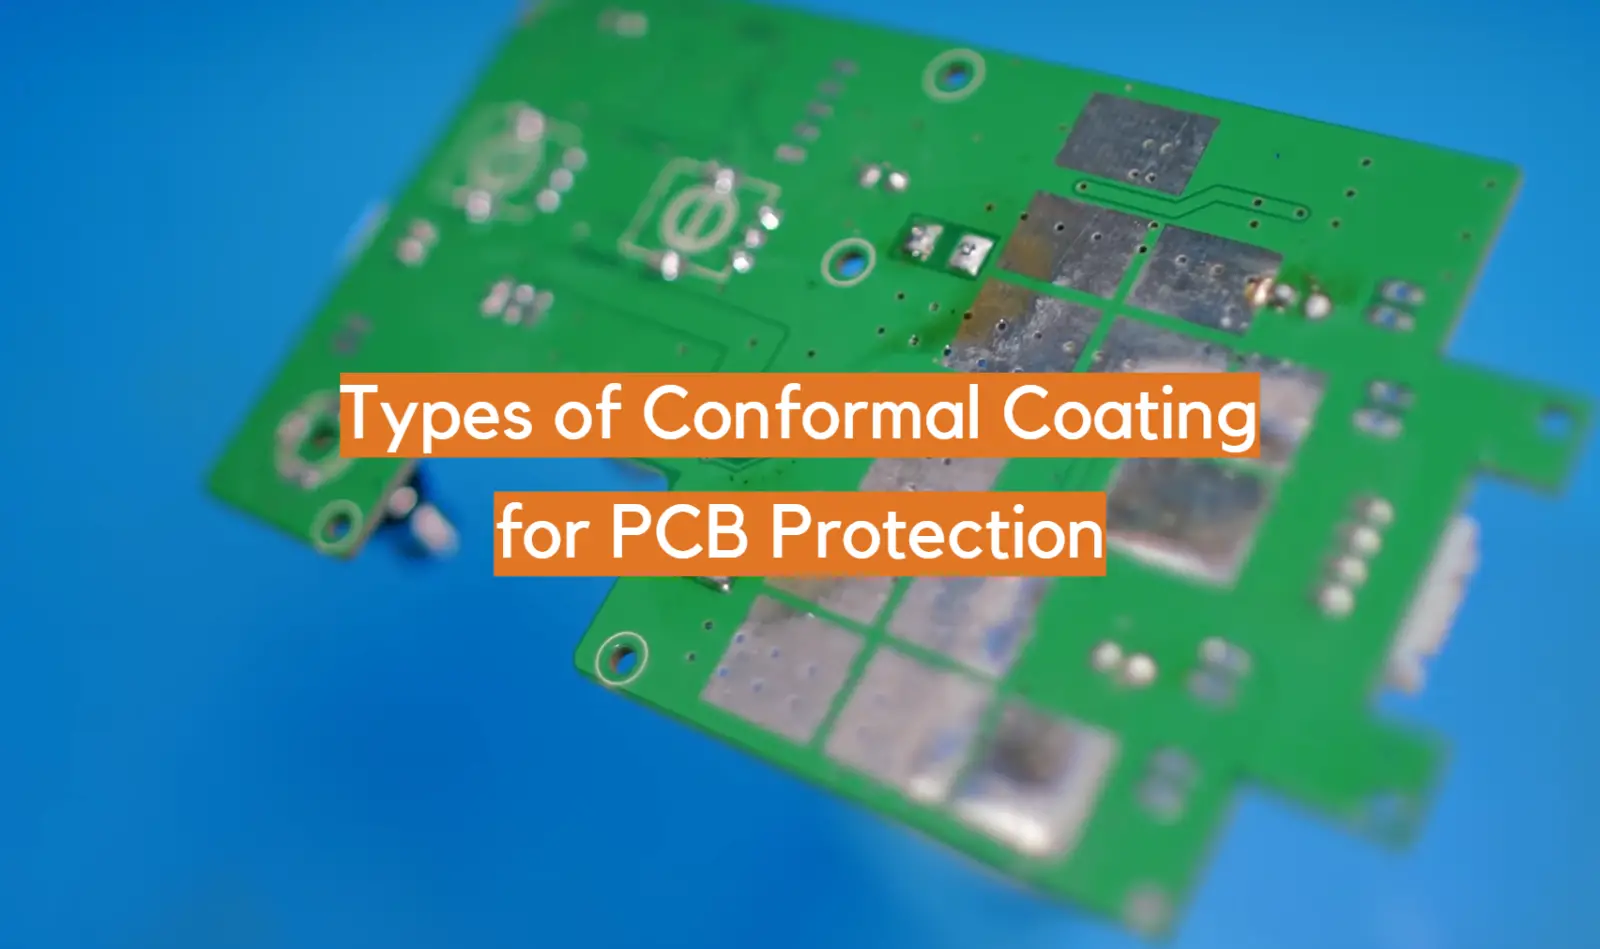 Types of Conformal Coating for PCB Protection